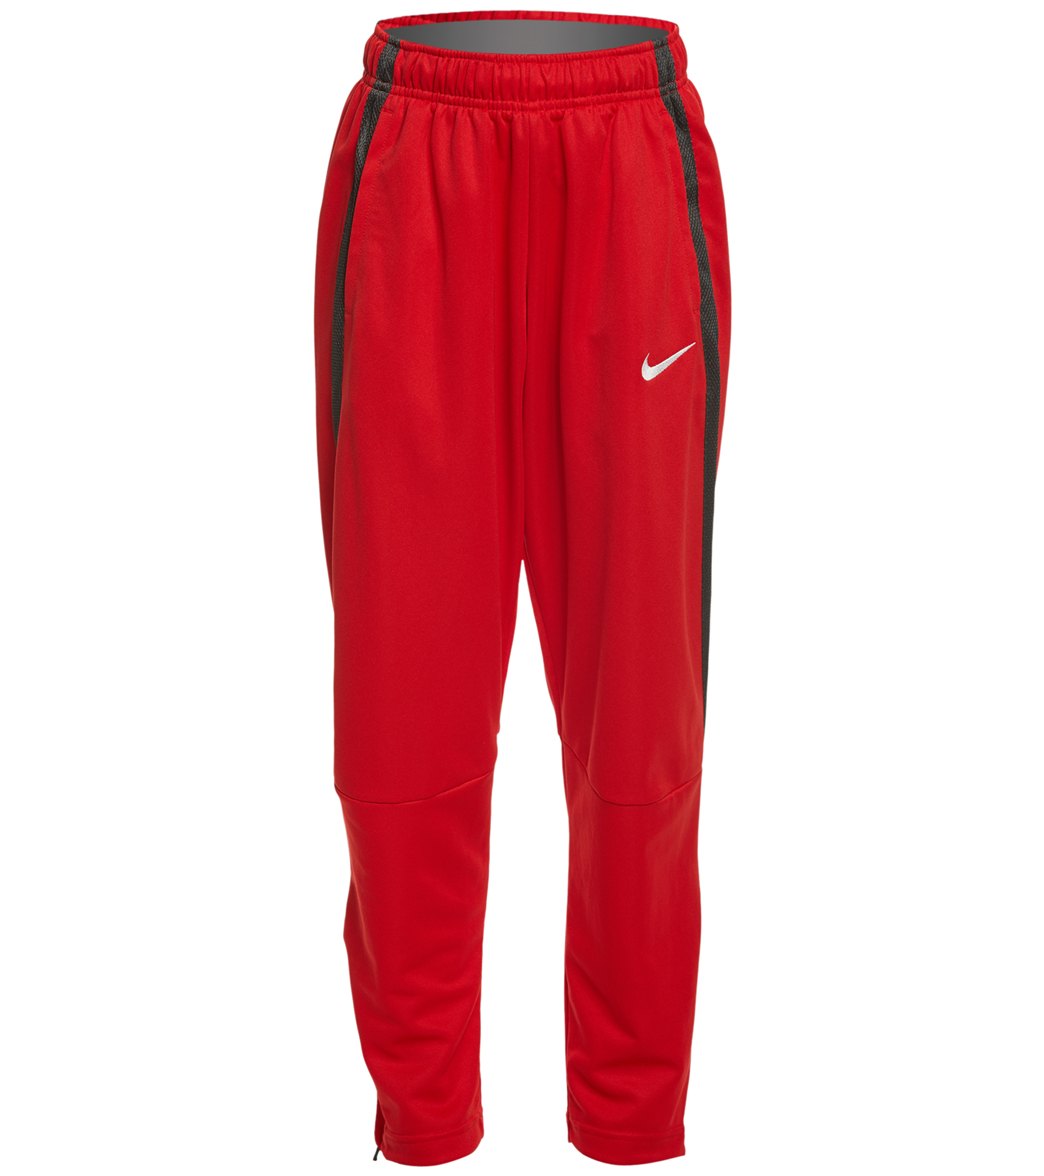 Nike Youth Women's Training Pants - Scarlet Xl Size Xl Polyester - Swimoutlet.com